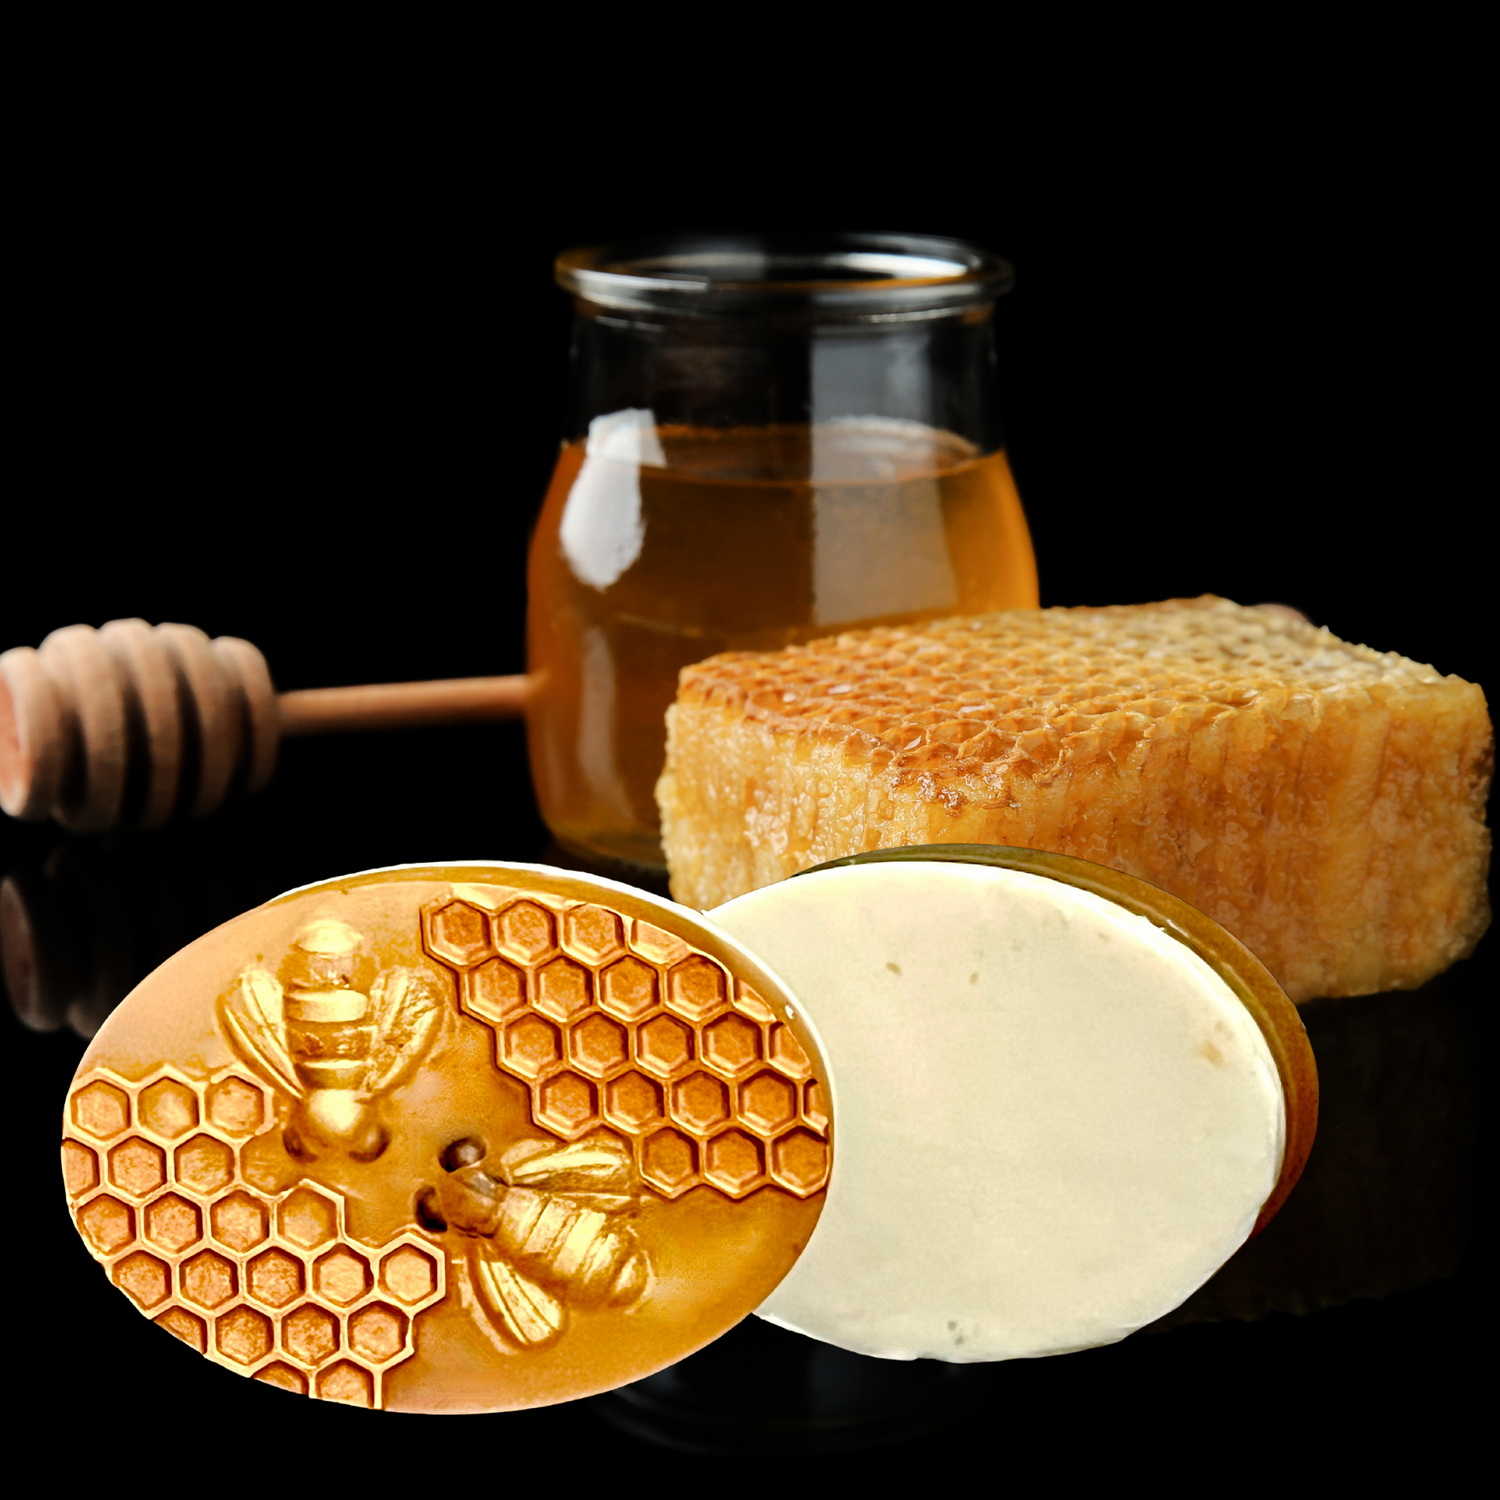 Alchemy7 | Honey Vanilla Oatmeal Shea Butter Soap - Luxurious Hydration and Gentle Exfoliation for Your Skin